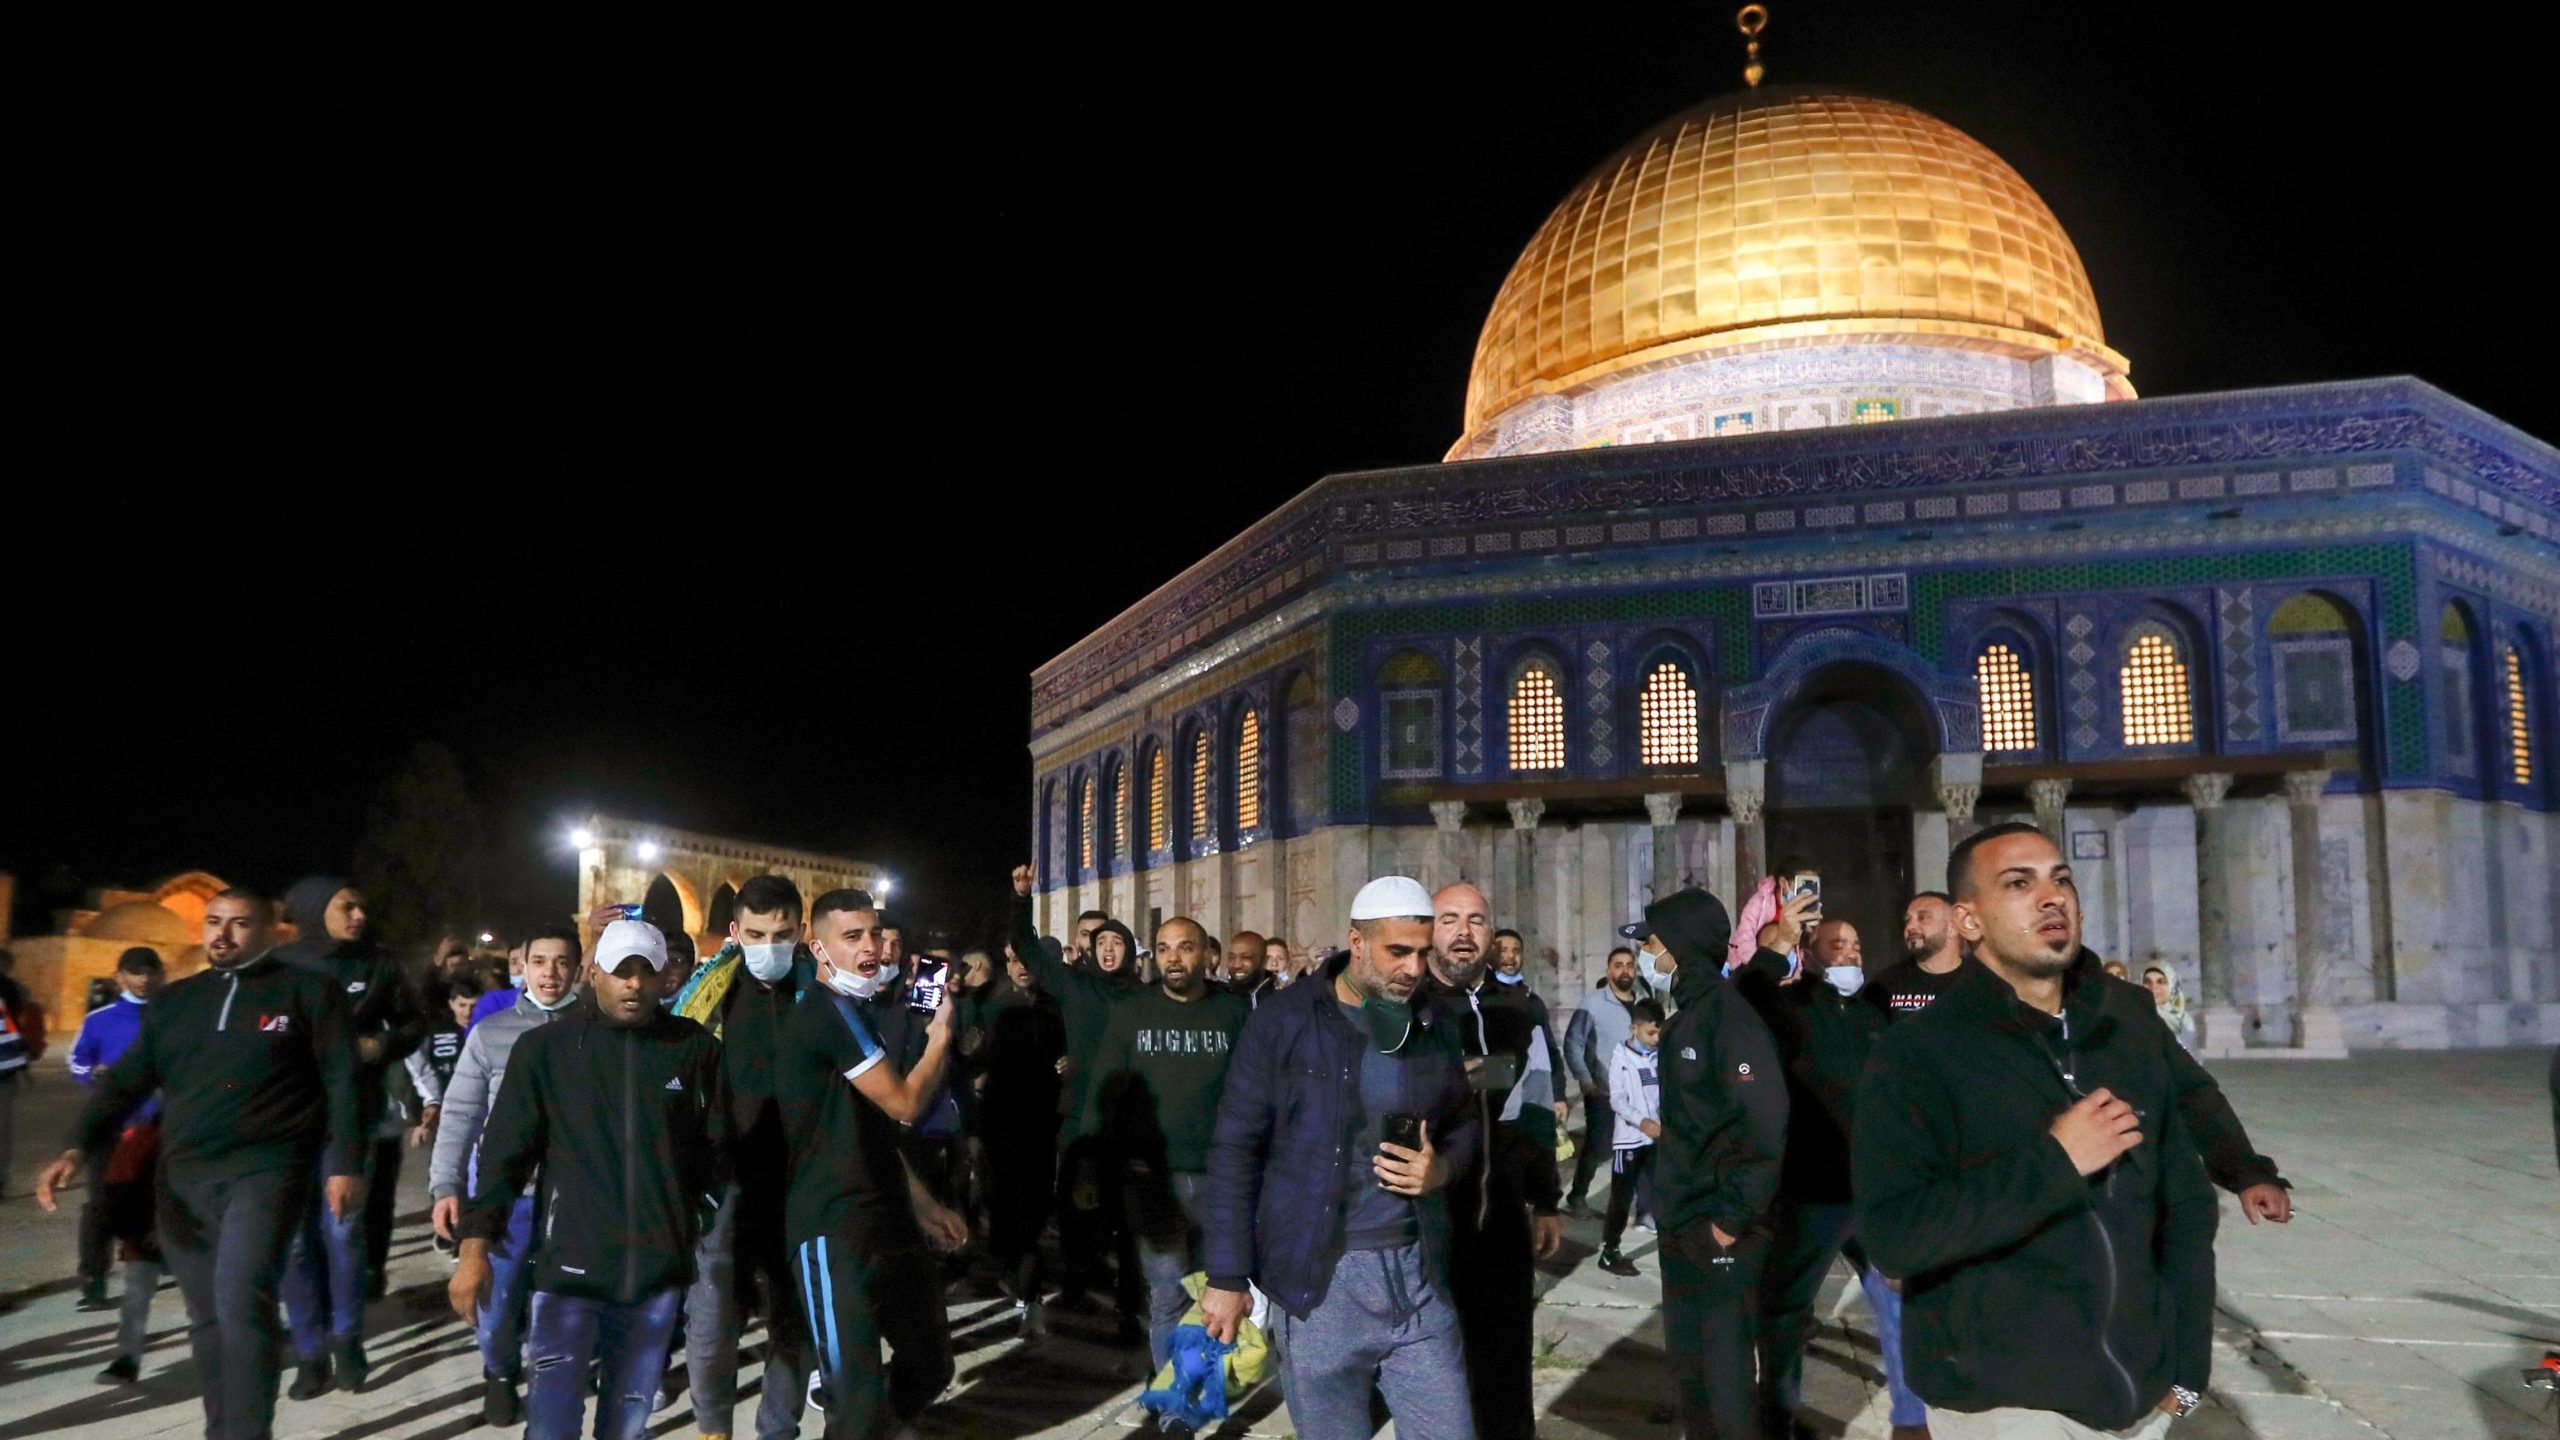 Jerusalem Holy Site Reopens for Muslim Prayer amid New Tensions